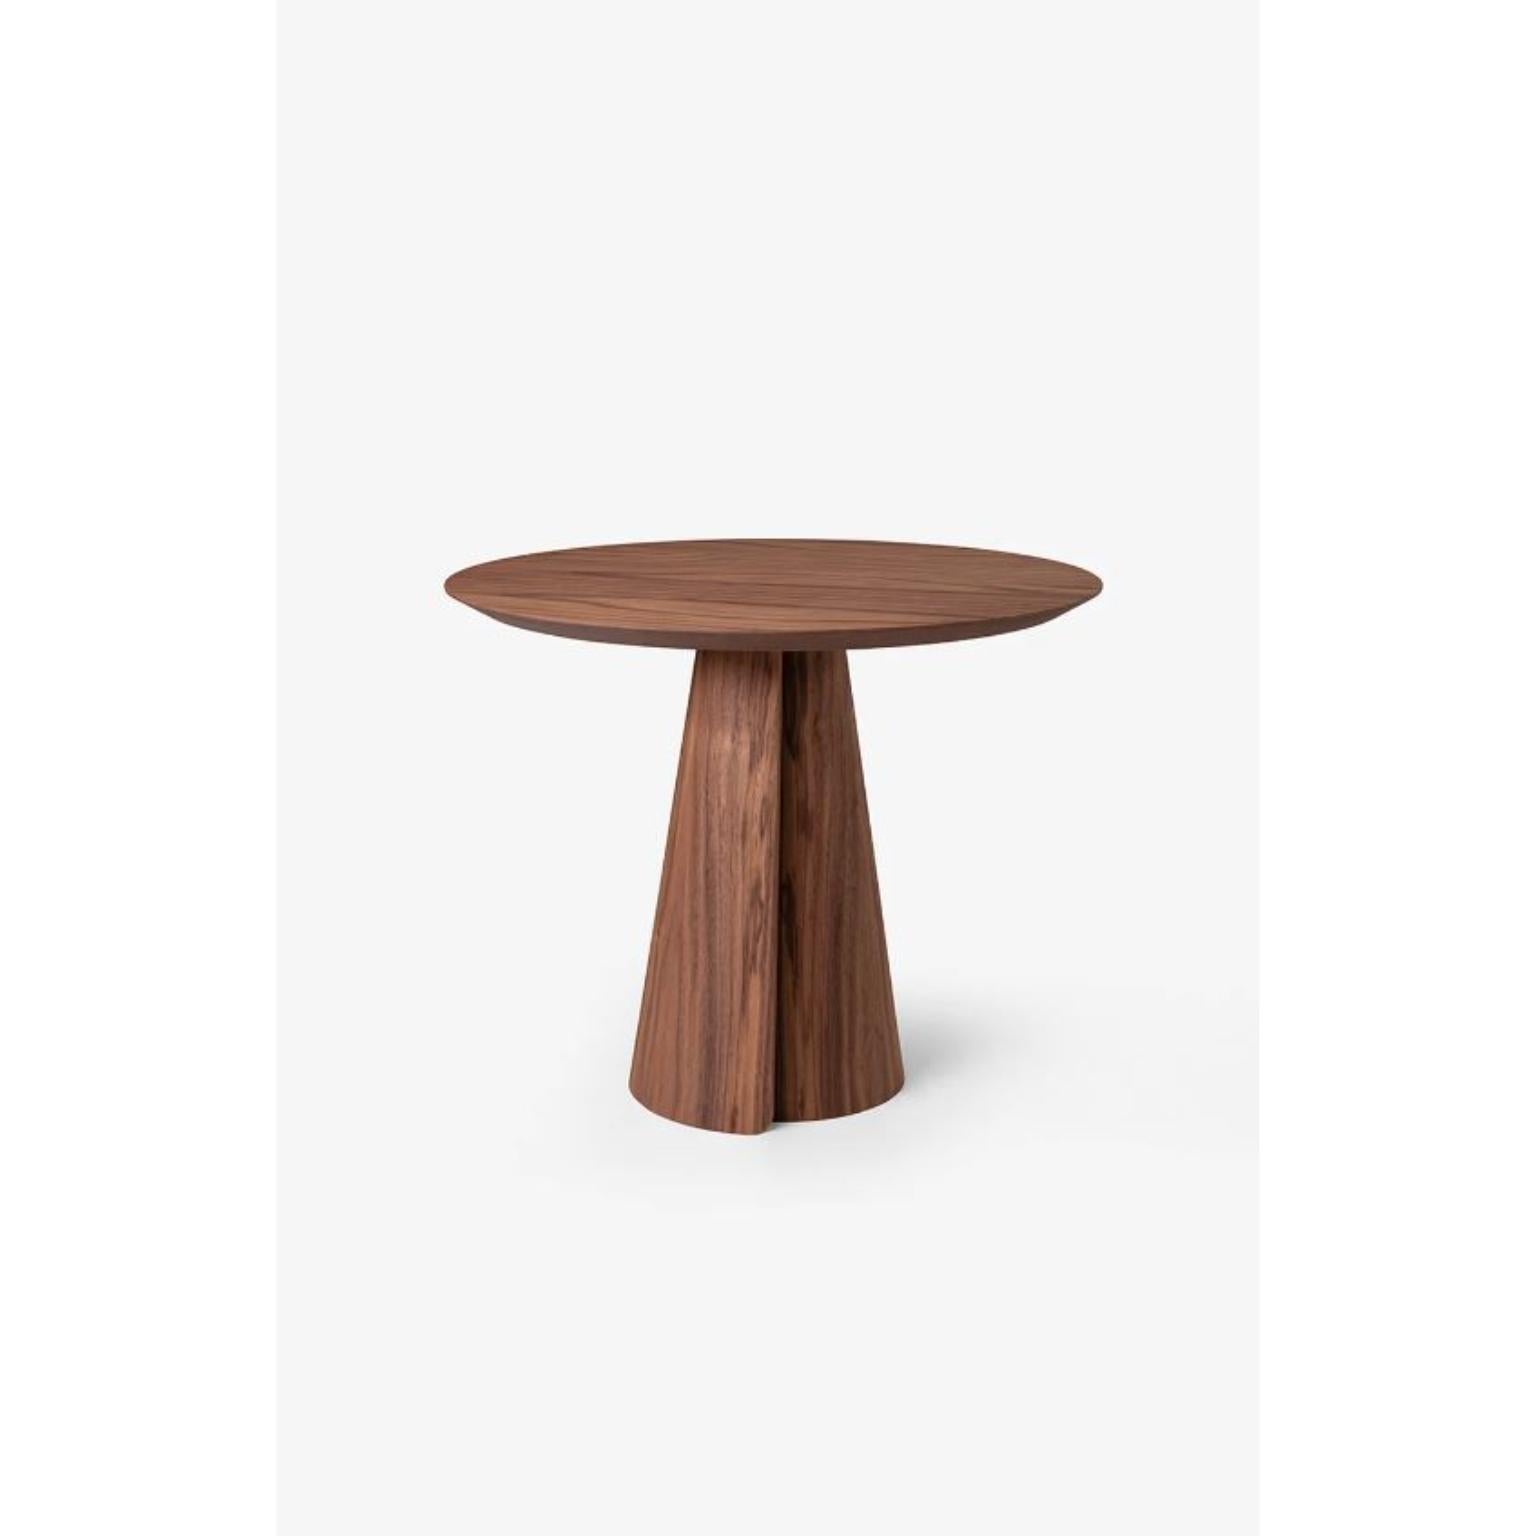 Volta Side Table 70 by Wentz
Dimensions: D 70 x W 70 x H 55 cm
Materials: Wood, Plywood, MDF, Veneer, Steel


The Volta table references nature in its impermanence. The detail on the base suggests natural movements and refers to nature's